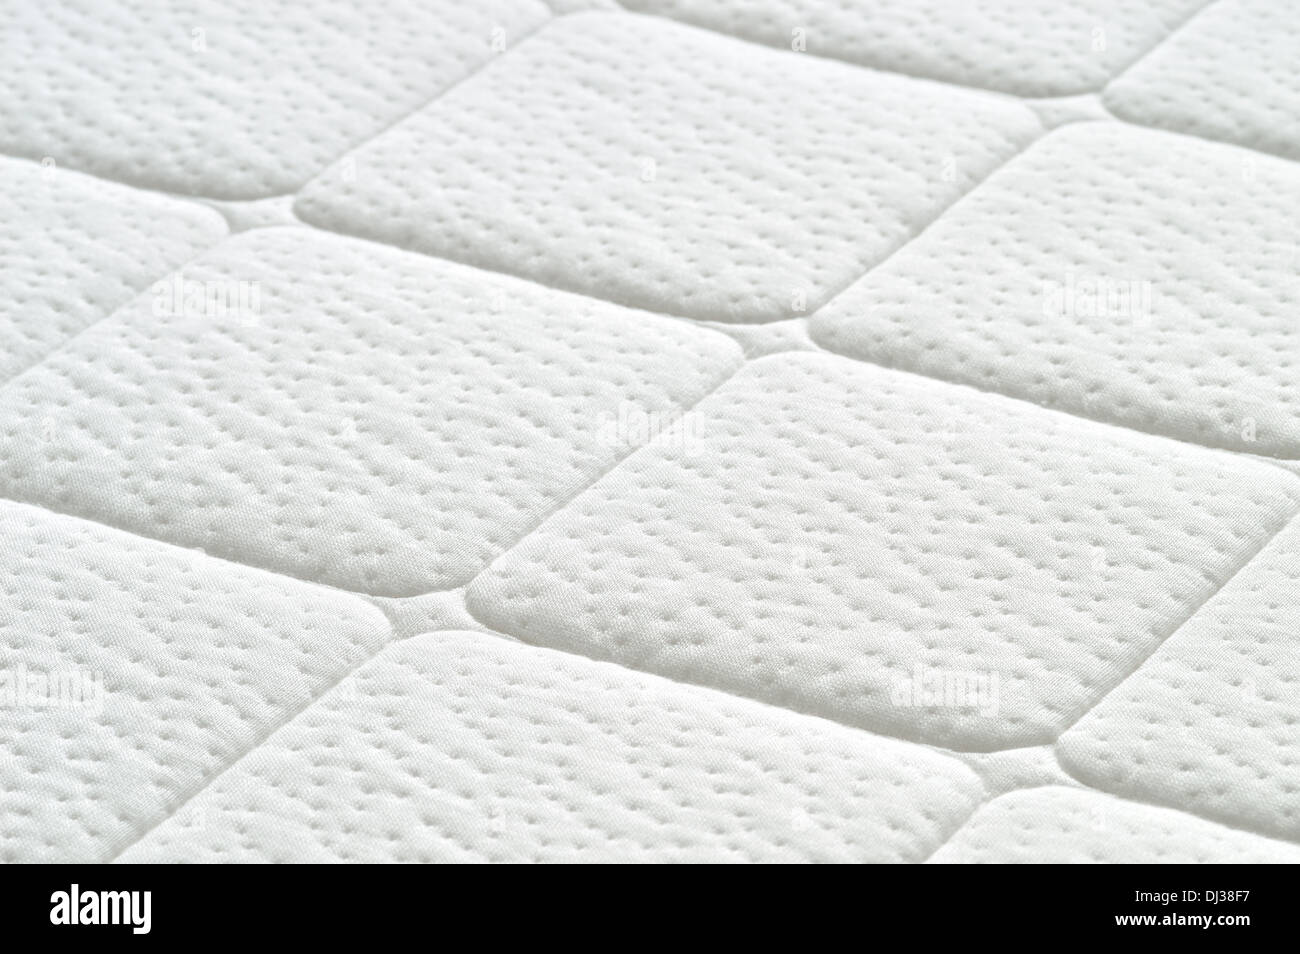 Close-up of white mattress texture. Patter of quilted material. Comfortable mattress. Copy space. Stock Photo